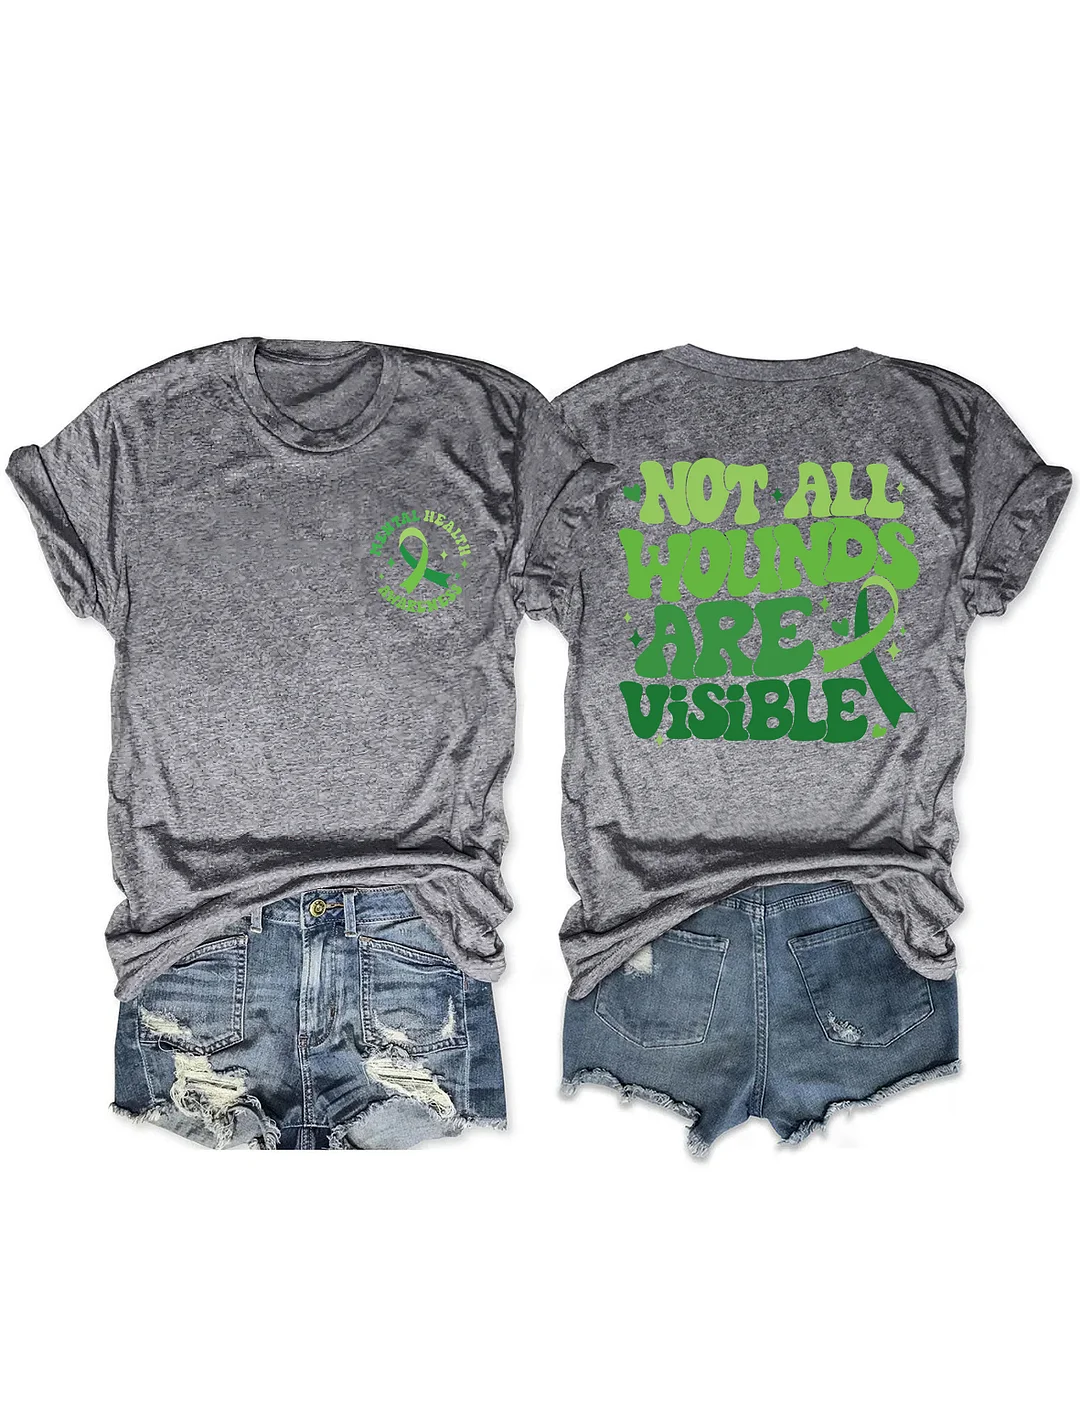 Not All Wounds Are Visible Mental Health T-shirt